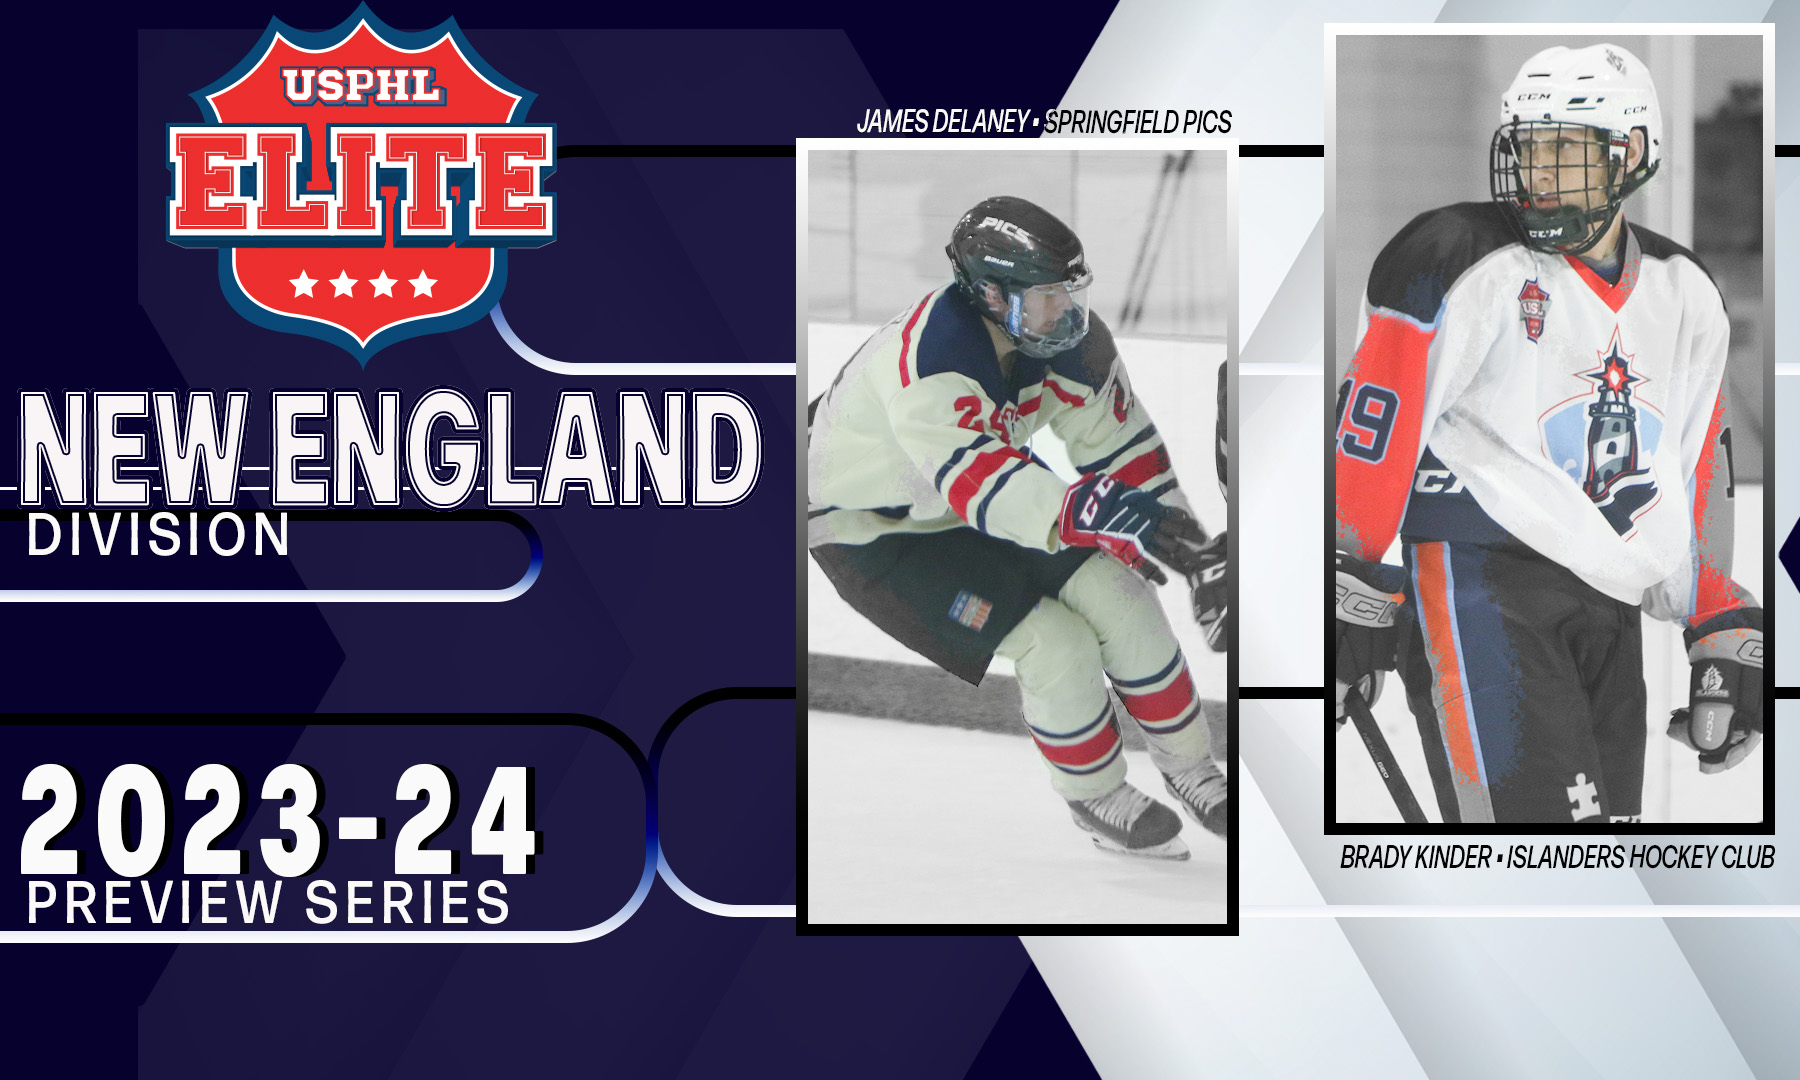 USPHL Elite 2023-24 Division Preview Series: New England